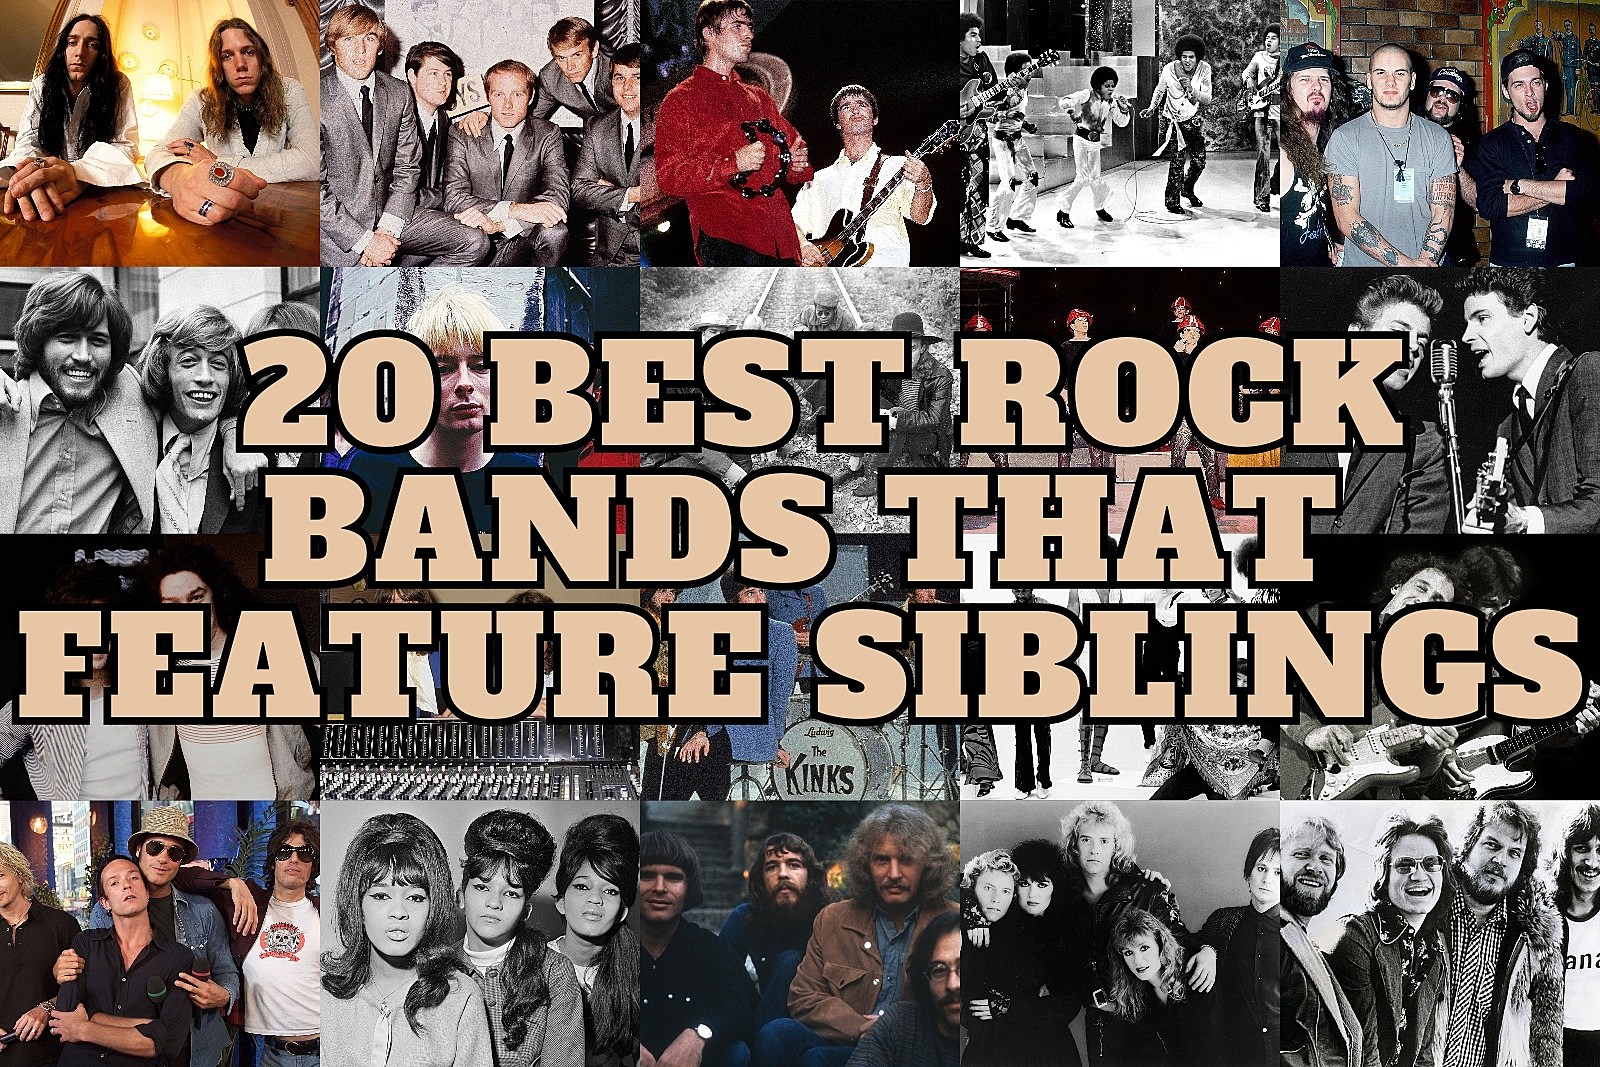 Family Affairs: 20 Best Rock Bands That Feature Siblings